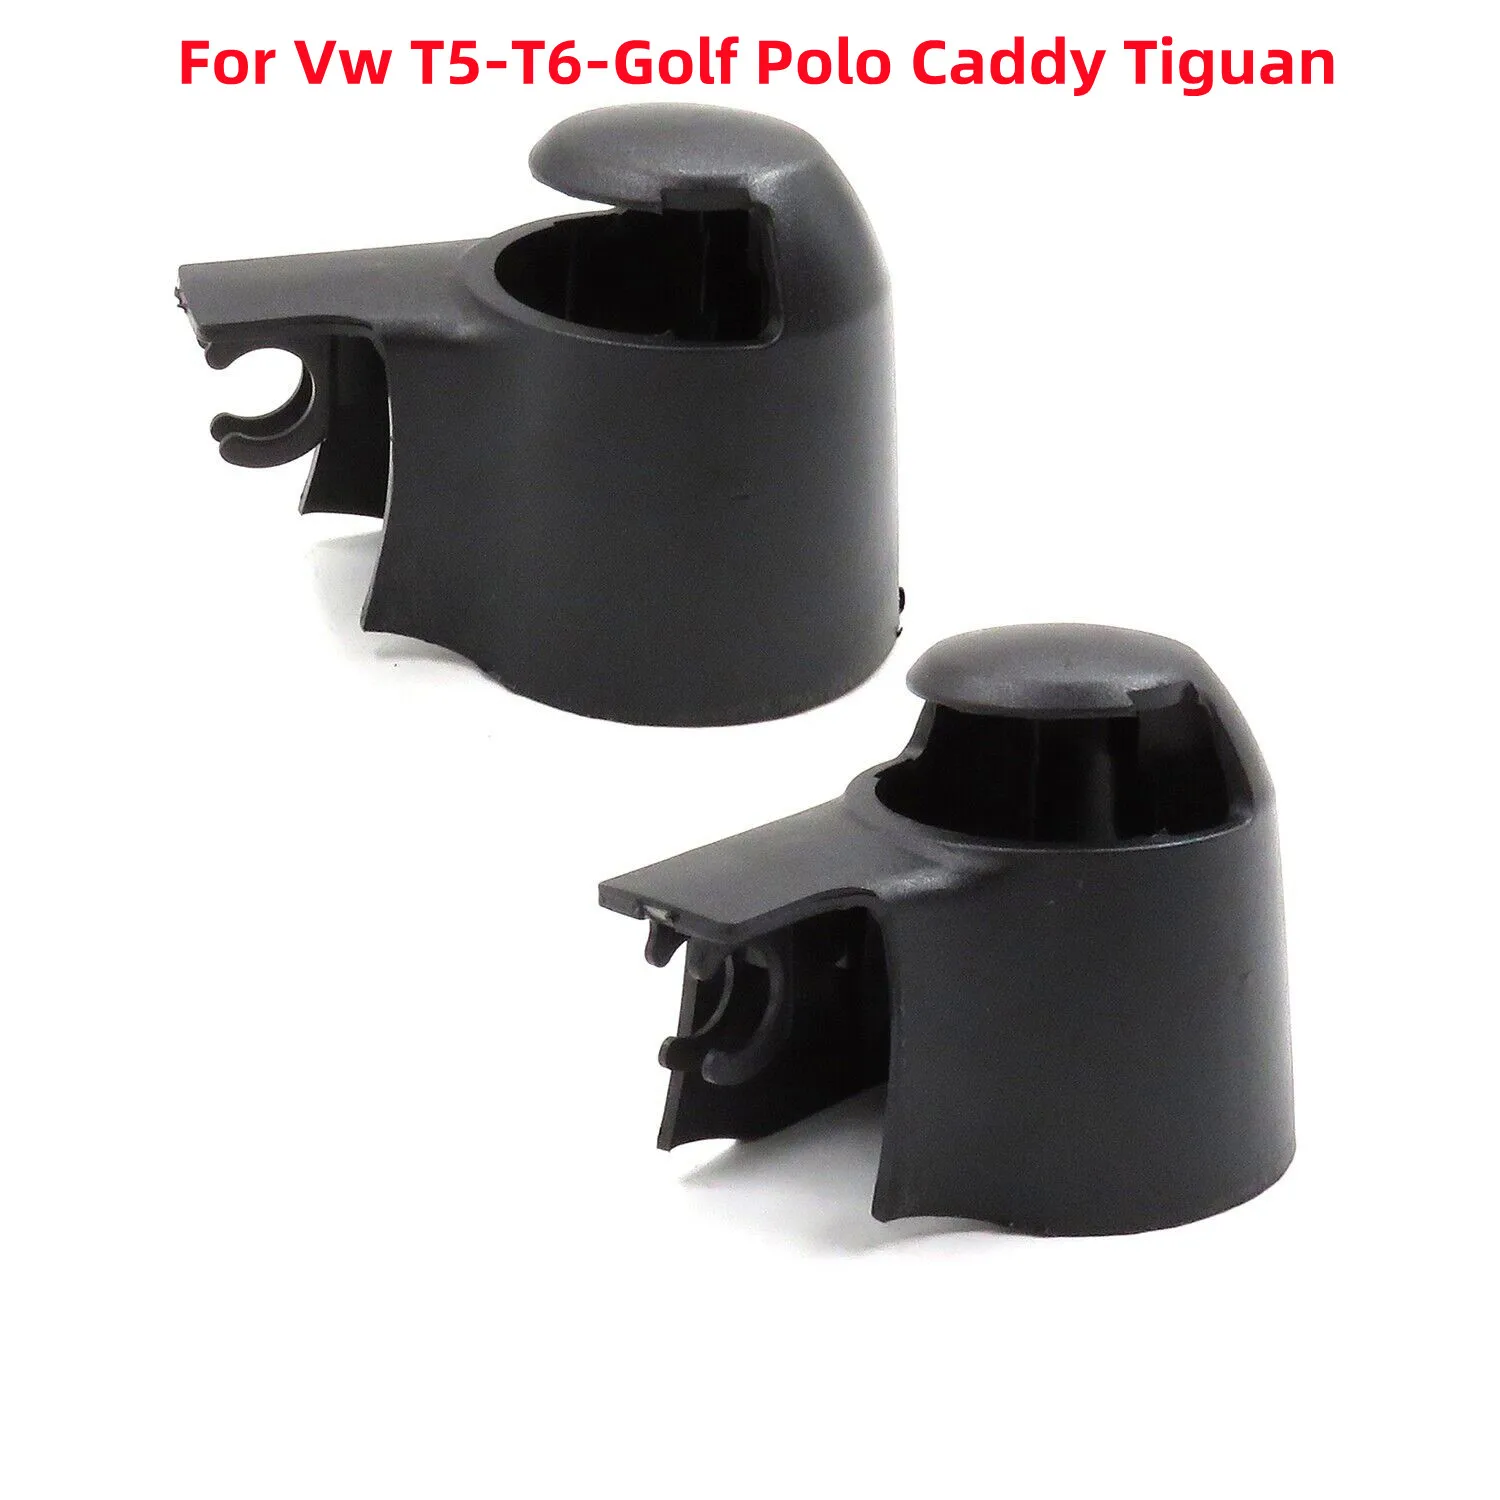 

For Vw T5-T6-Golf Polo Caddy Tiguan Seat Skoda Rear Wiper Arm Cover Cap 6q6955435d Car Windscreen Wipers Replacement Parts